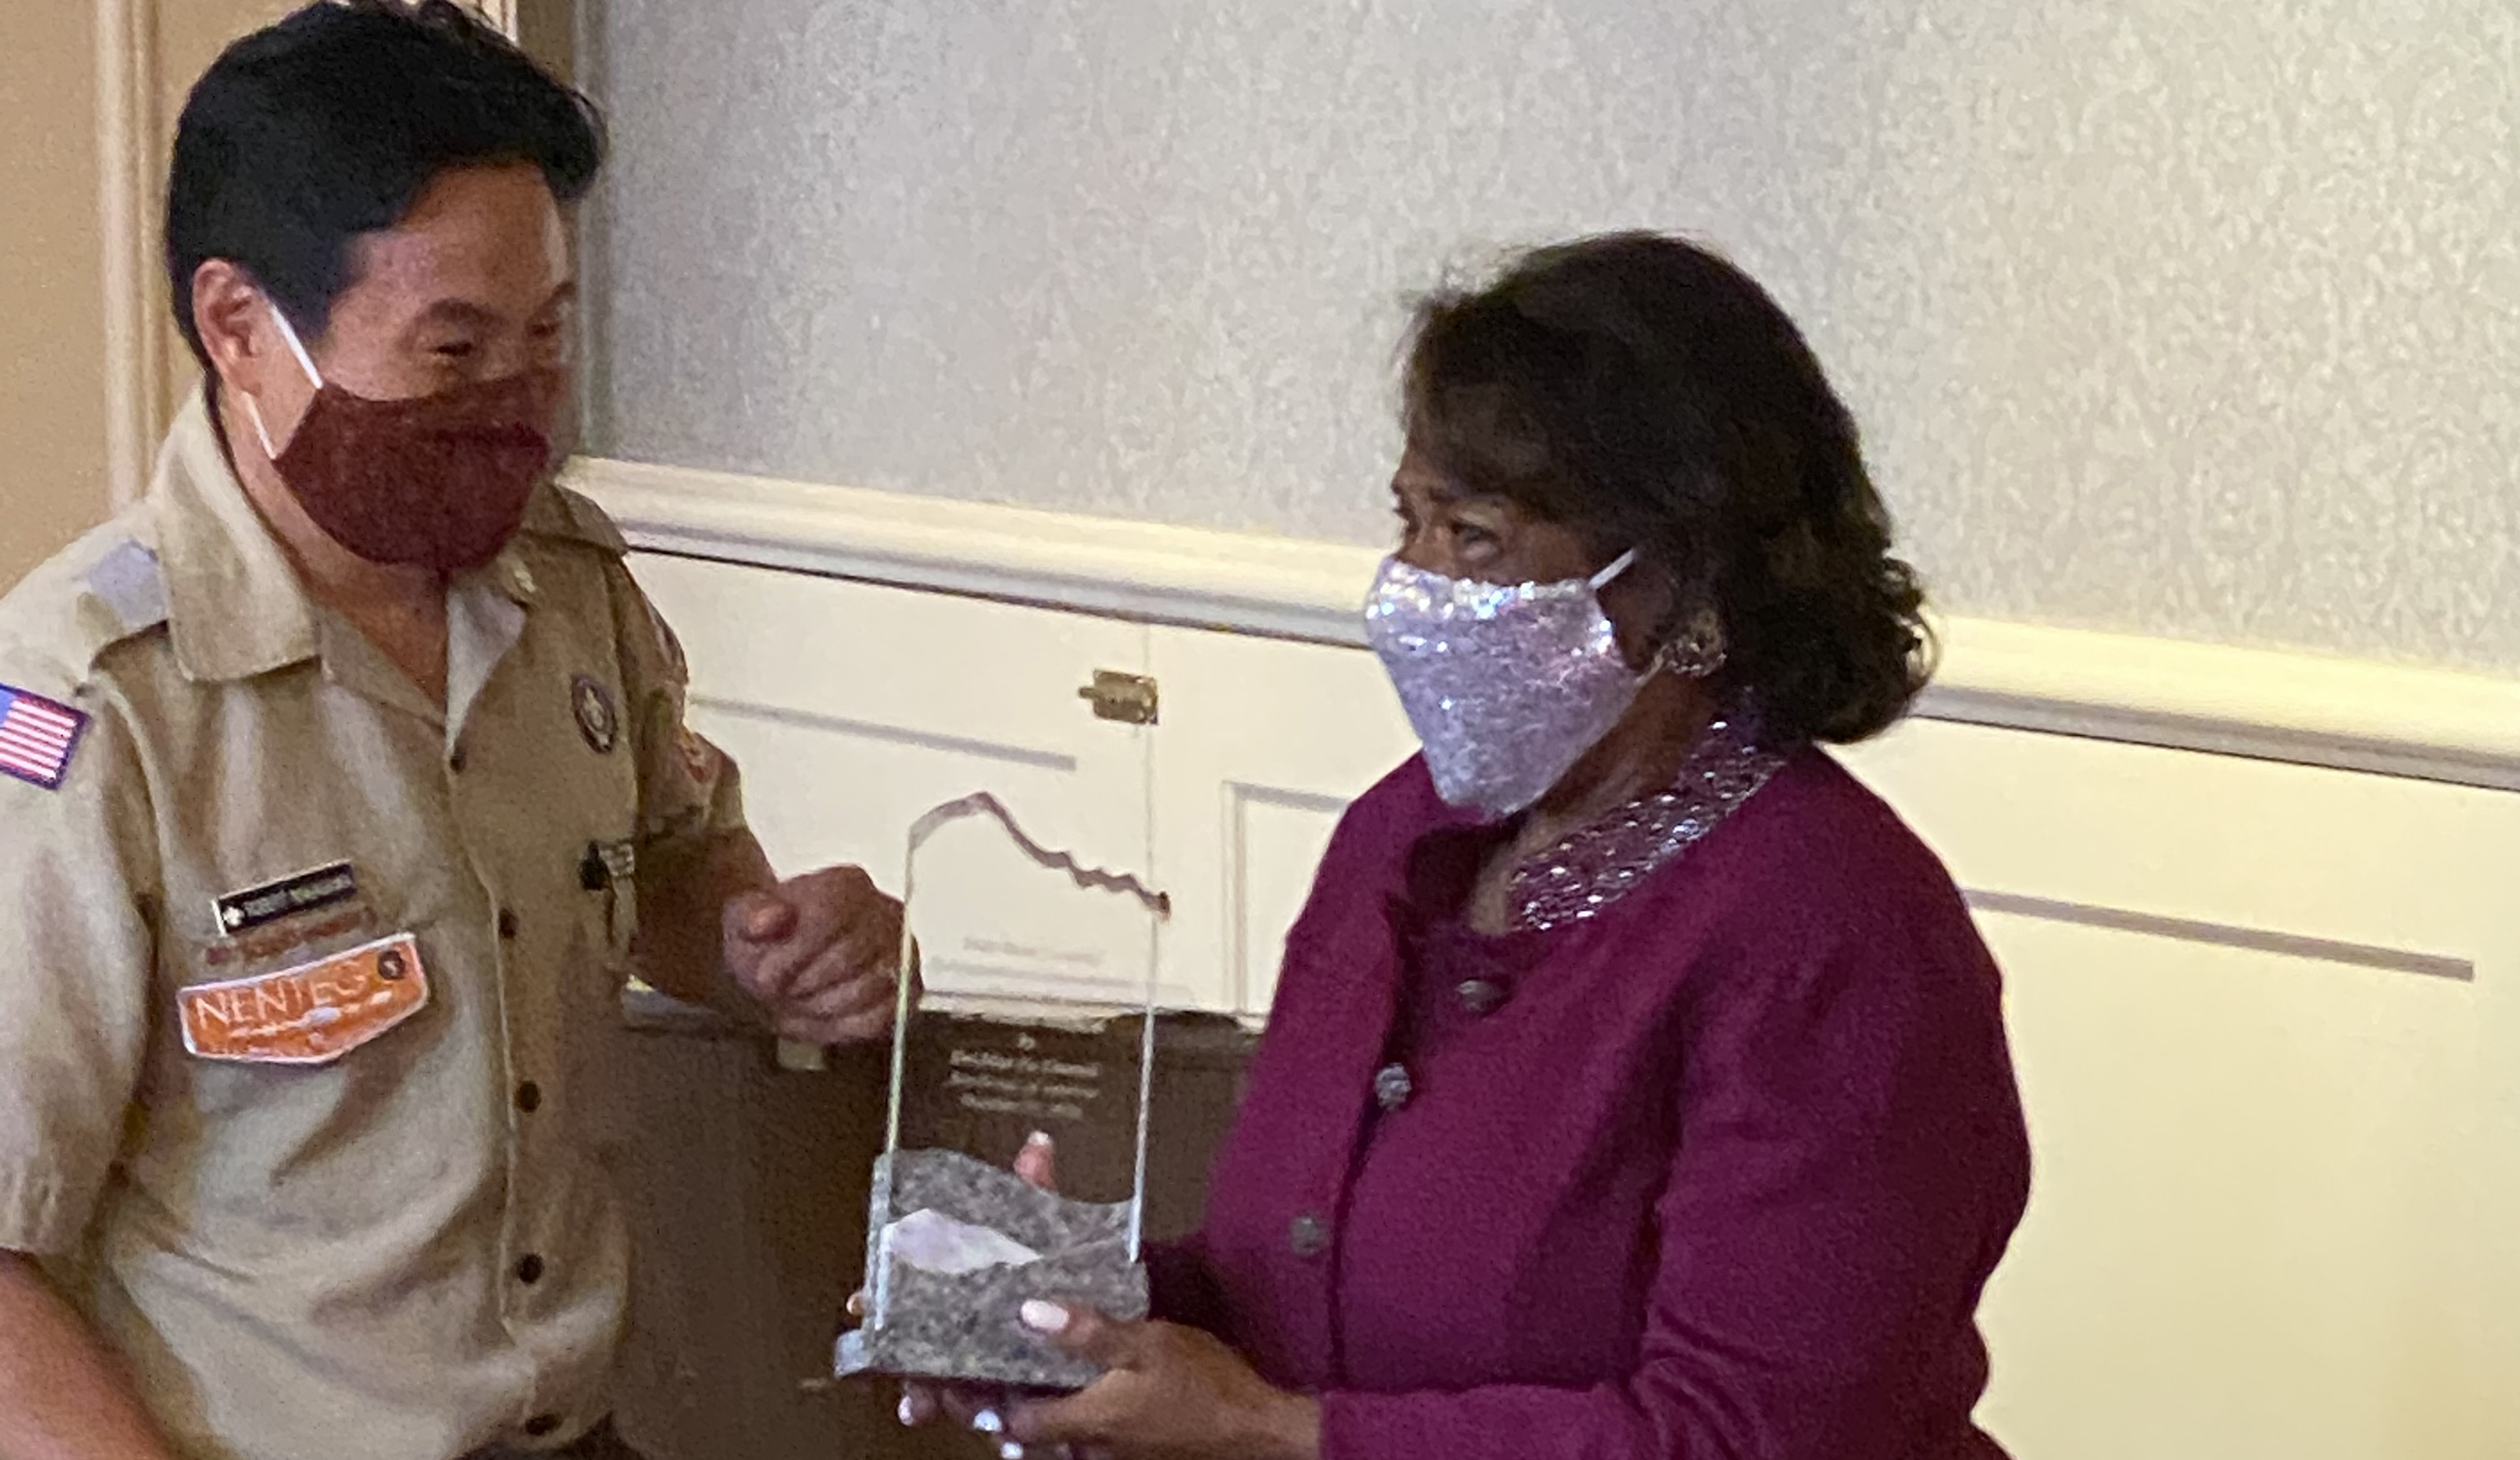 Robert Nakagawa, CEO of the Del-Mar-Va Council of Boy Scouts of America presents Dr. Wilma Mishoe with the organization's 2020 Distinguished Citizen Award.